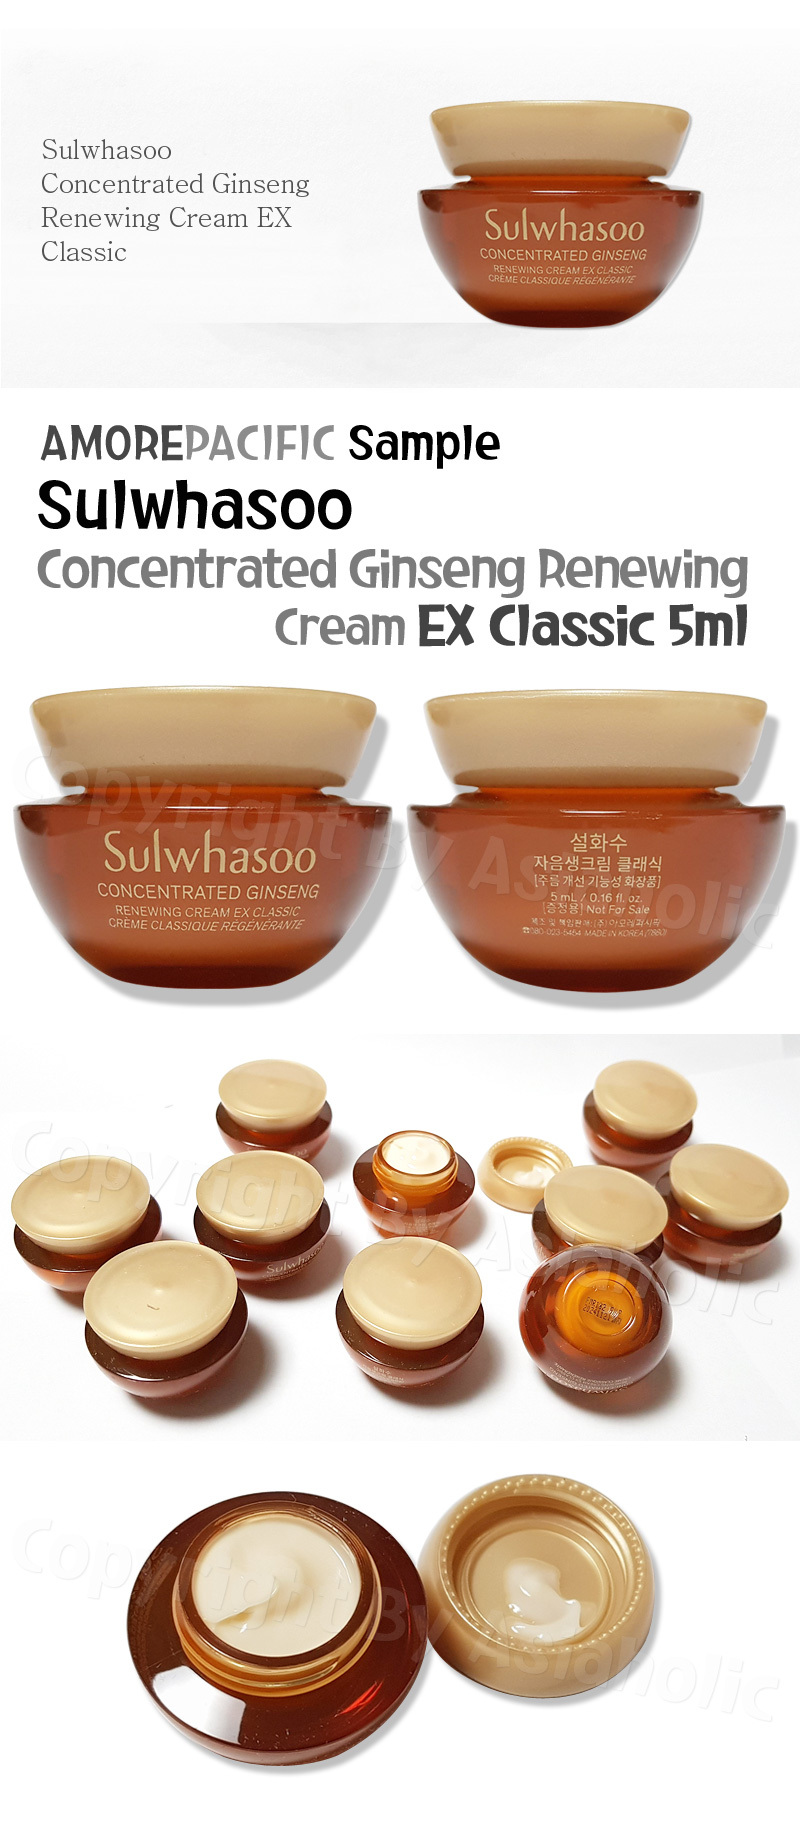 Sulwhasoo Concentrated Ginseng Renewing Cream EX Classic 5ml x 1pcs (5ml) Newest Version